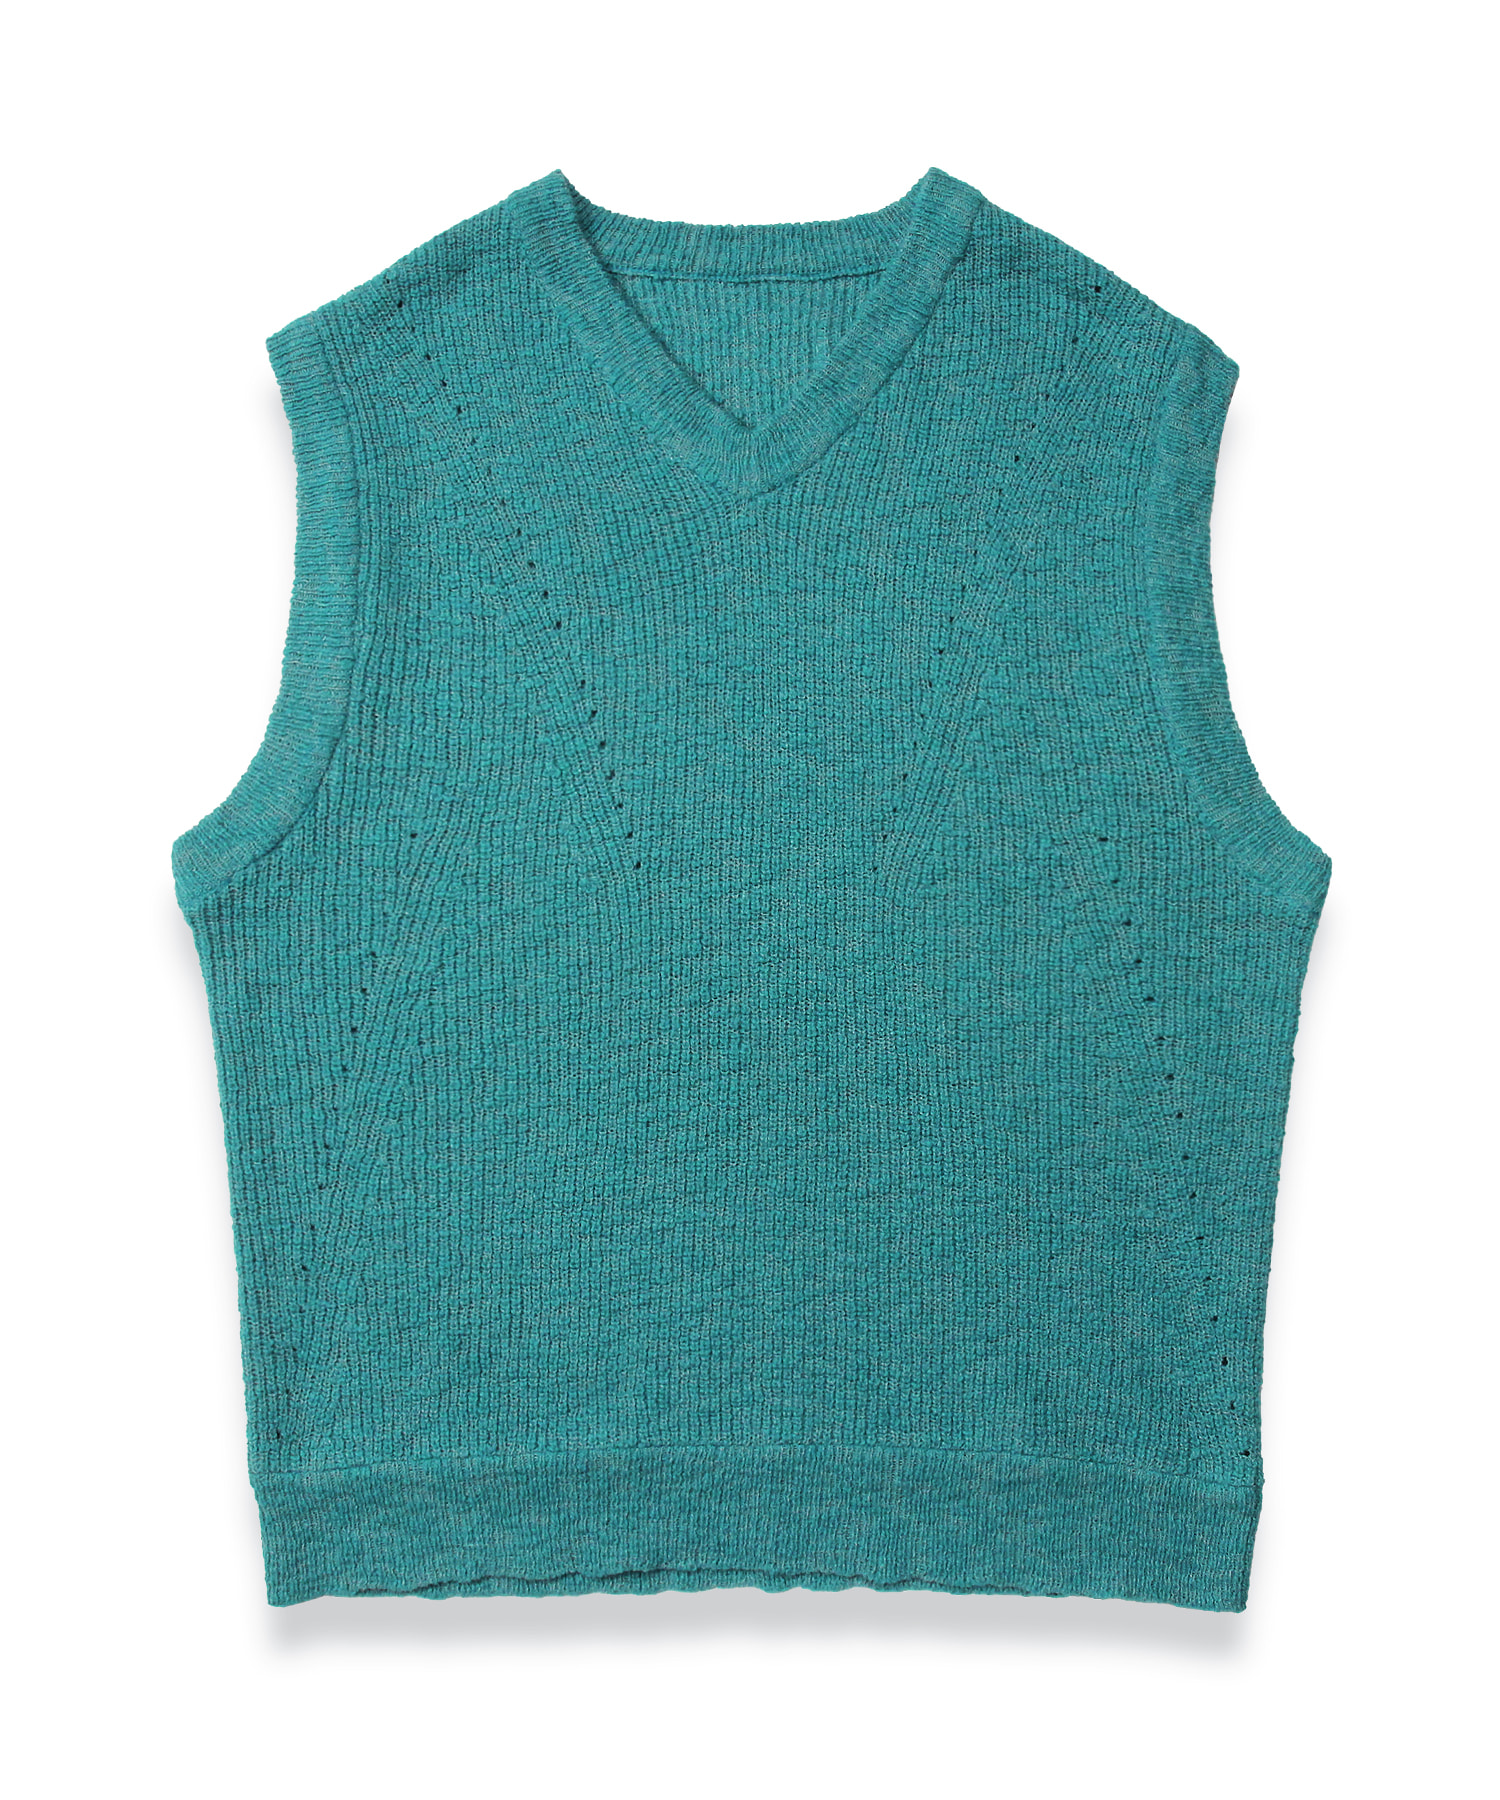 Loose Fit Mixed Scotch Knit Vest TEAL GREEN